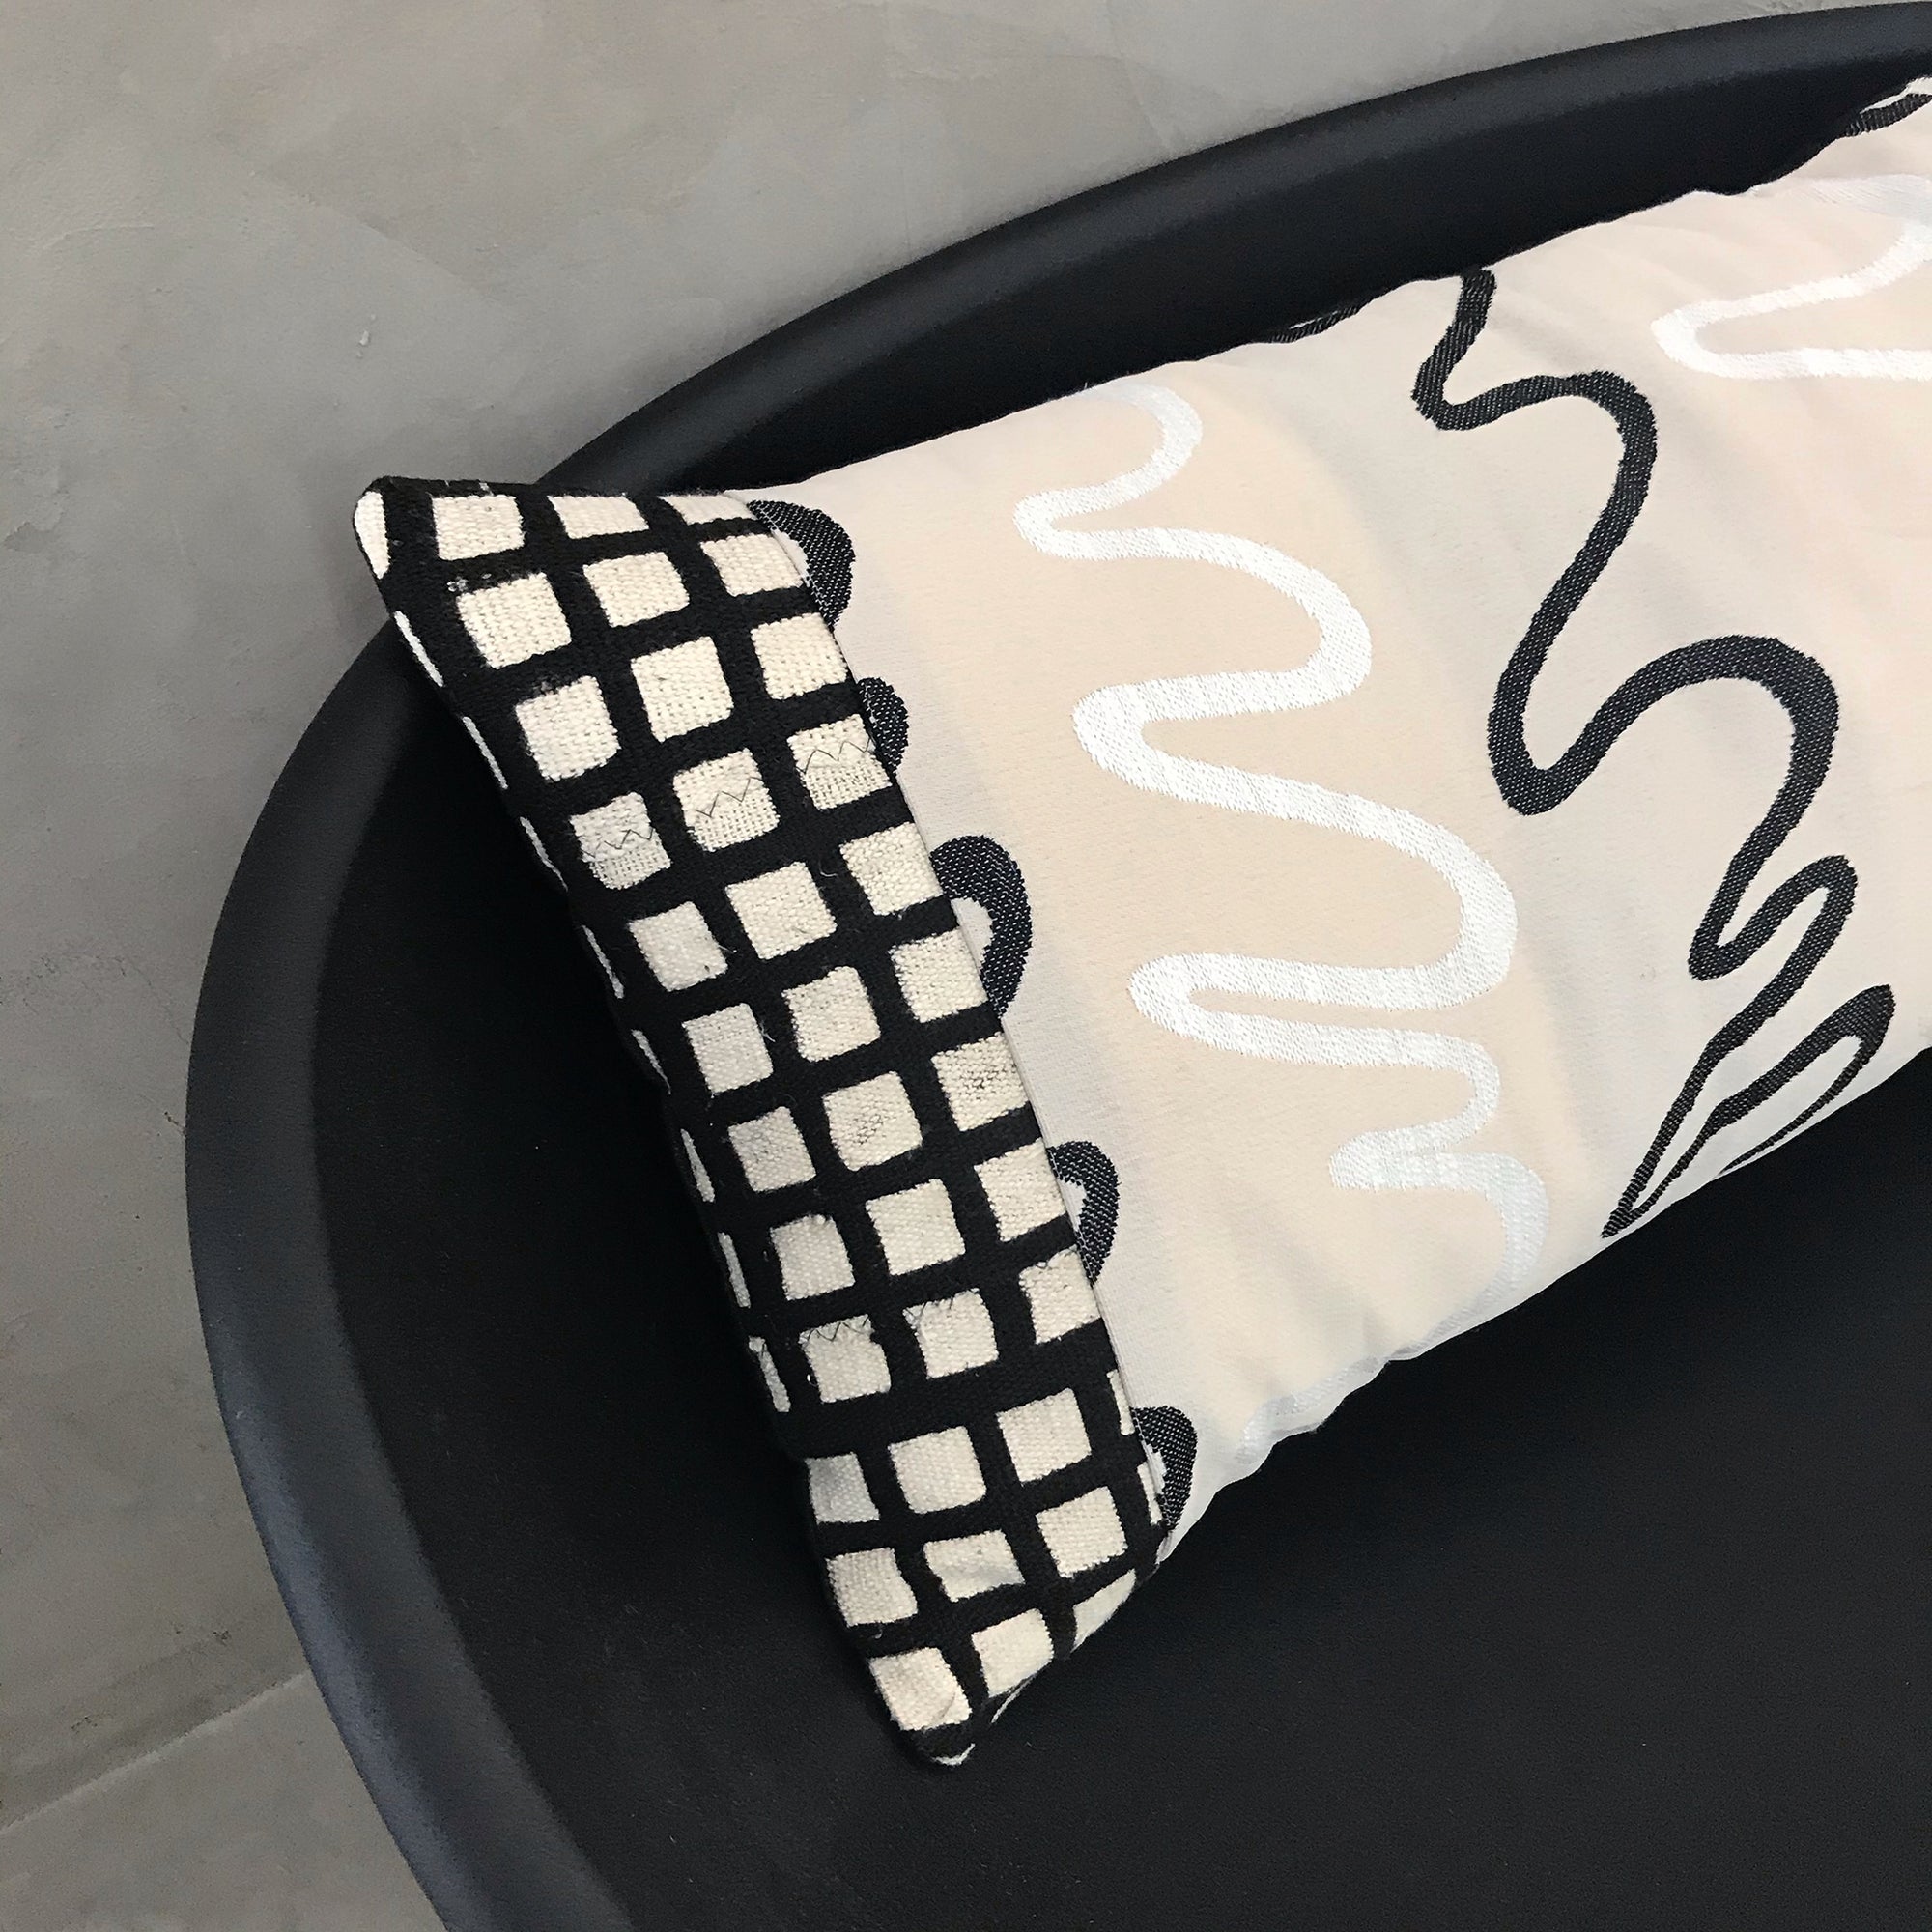 Detail pattern shot of the black grid, white and black squiggles against the beige mudcloth fabric. Lumbar pillow.